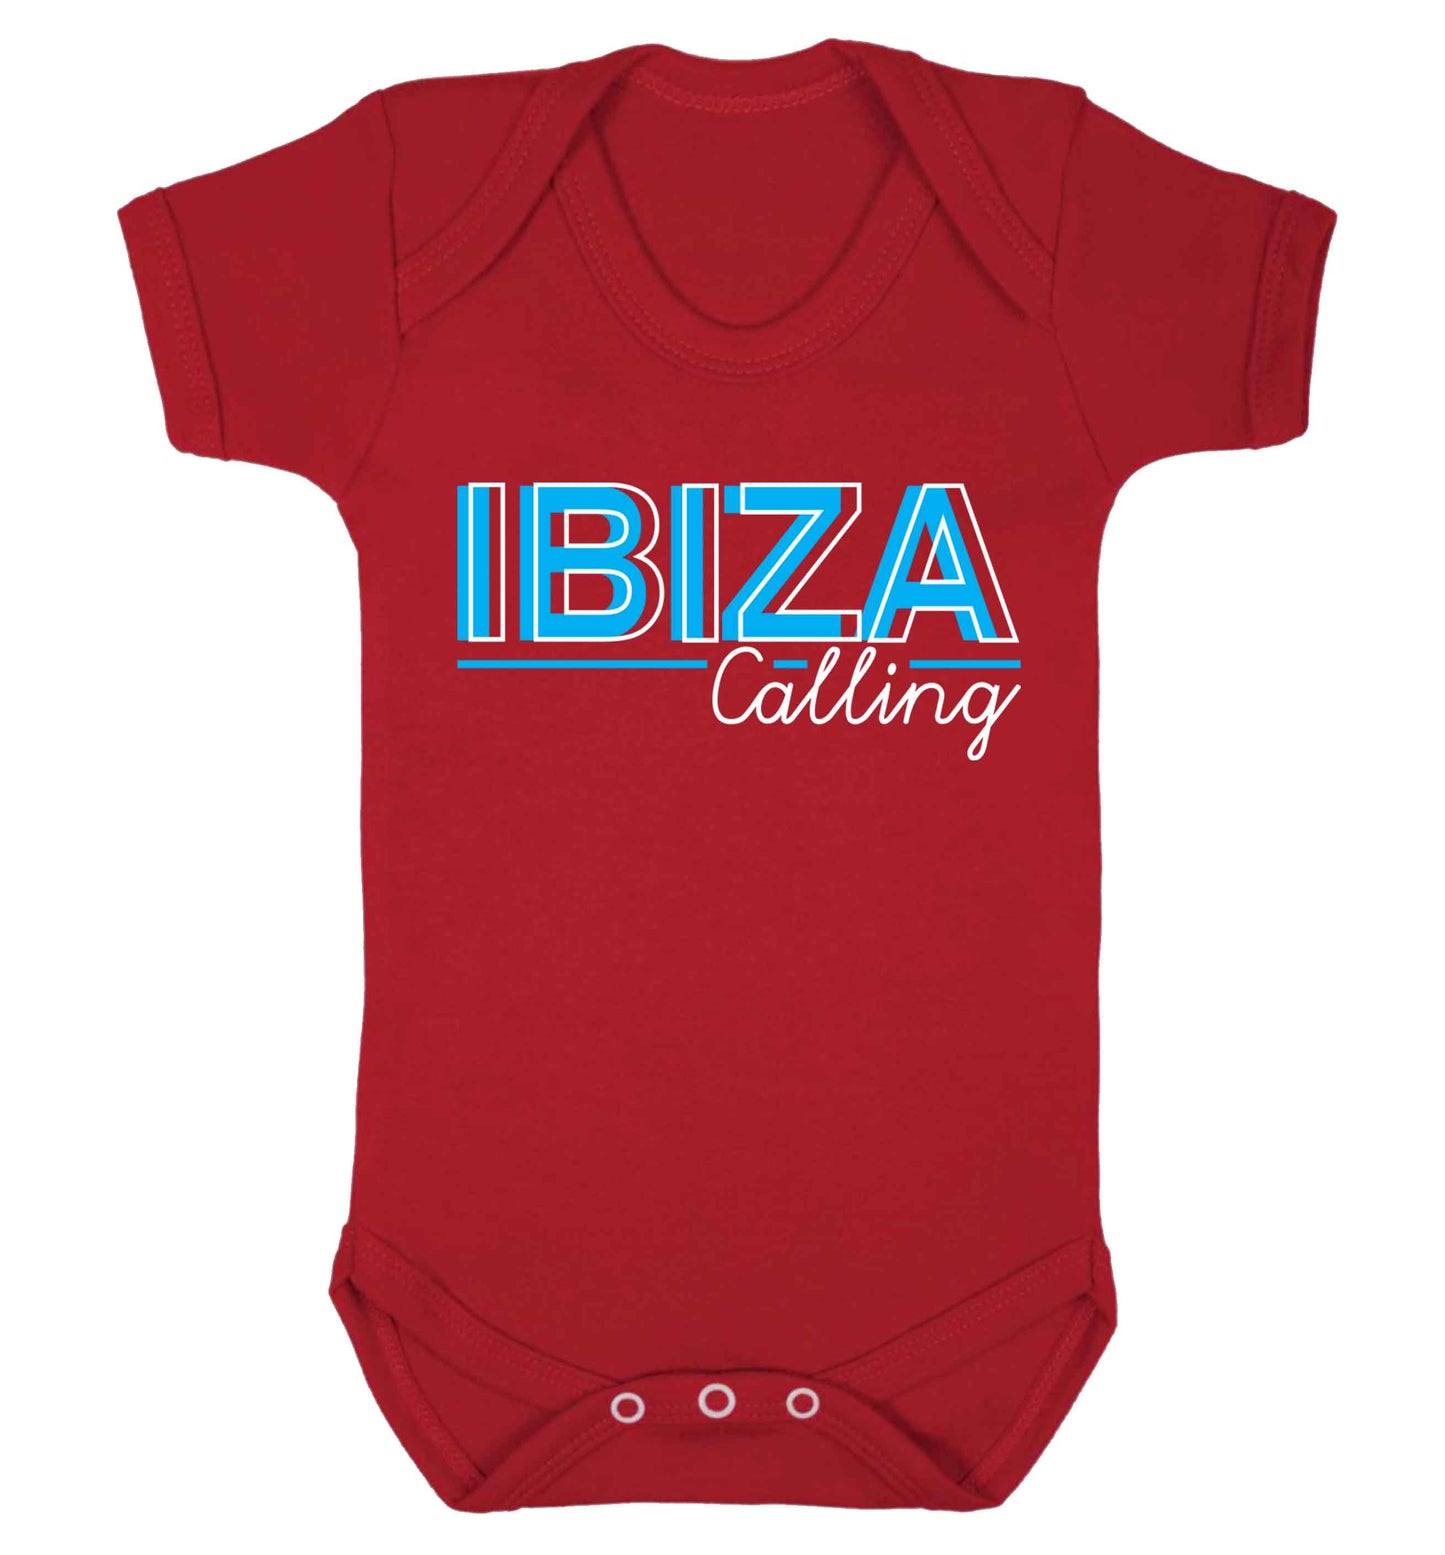 Ibiza calling Baby Vest red 18-24 months